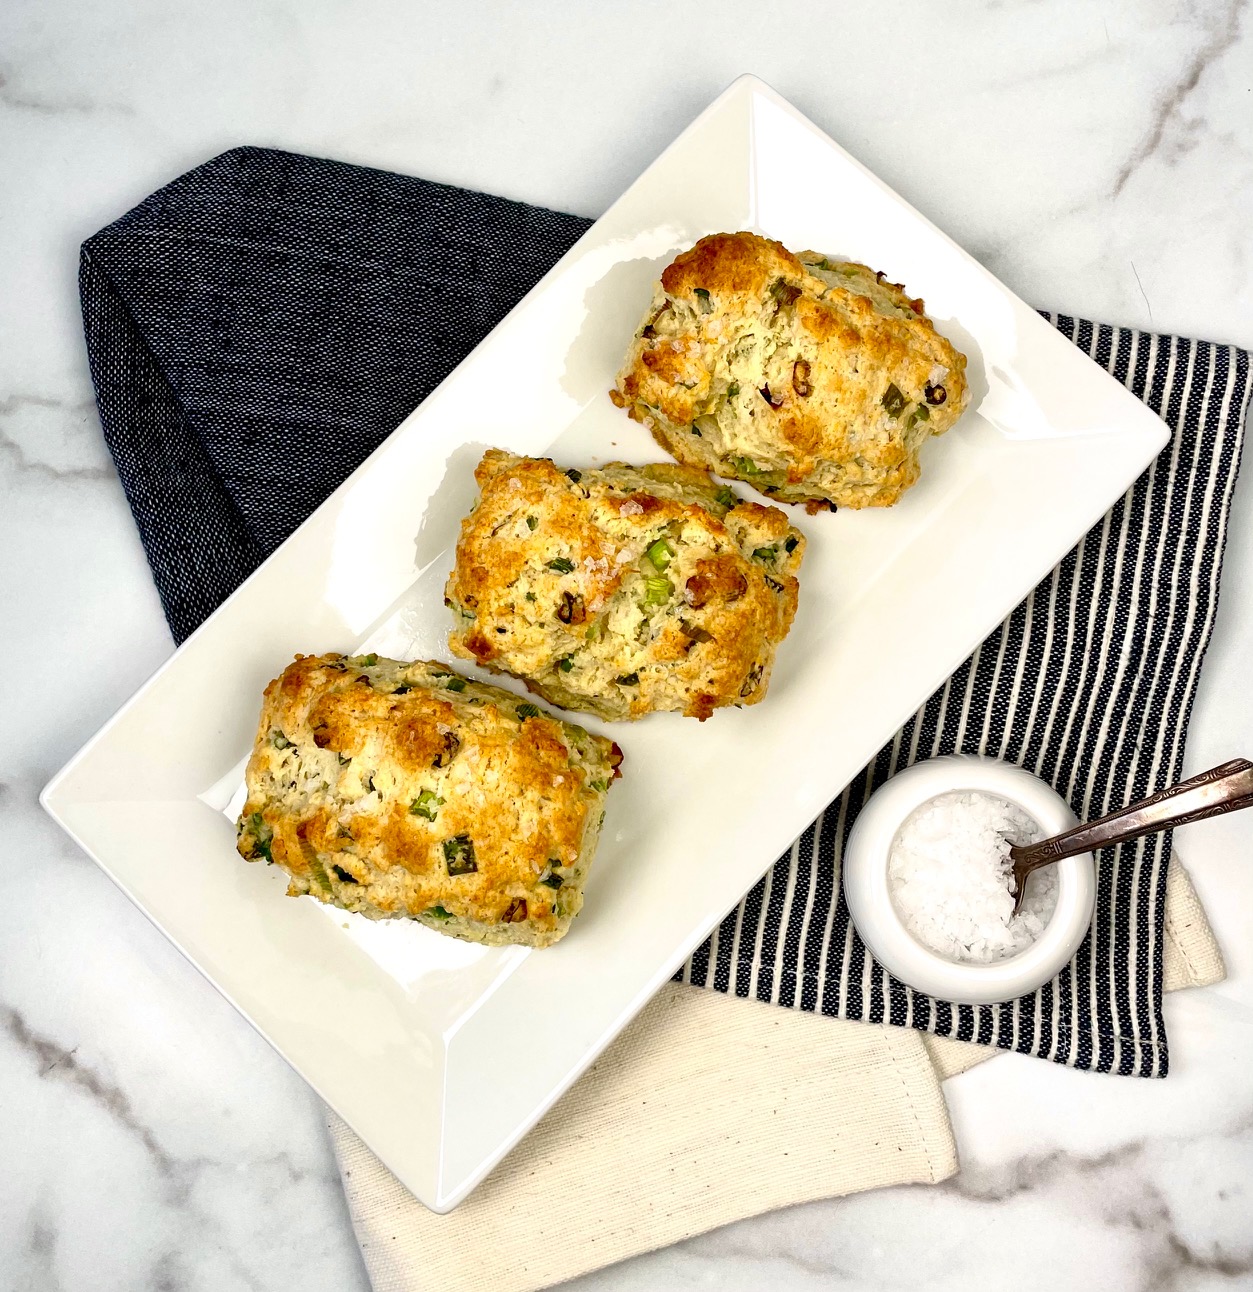 Sour Cream and Scallion Biscuits - Leah Hawkins